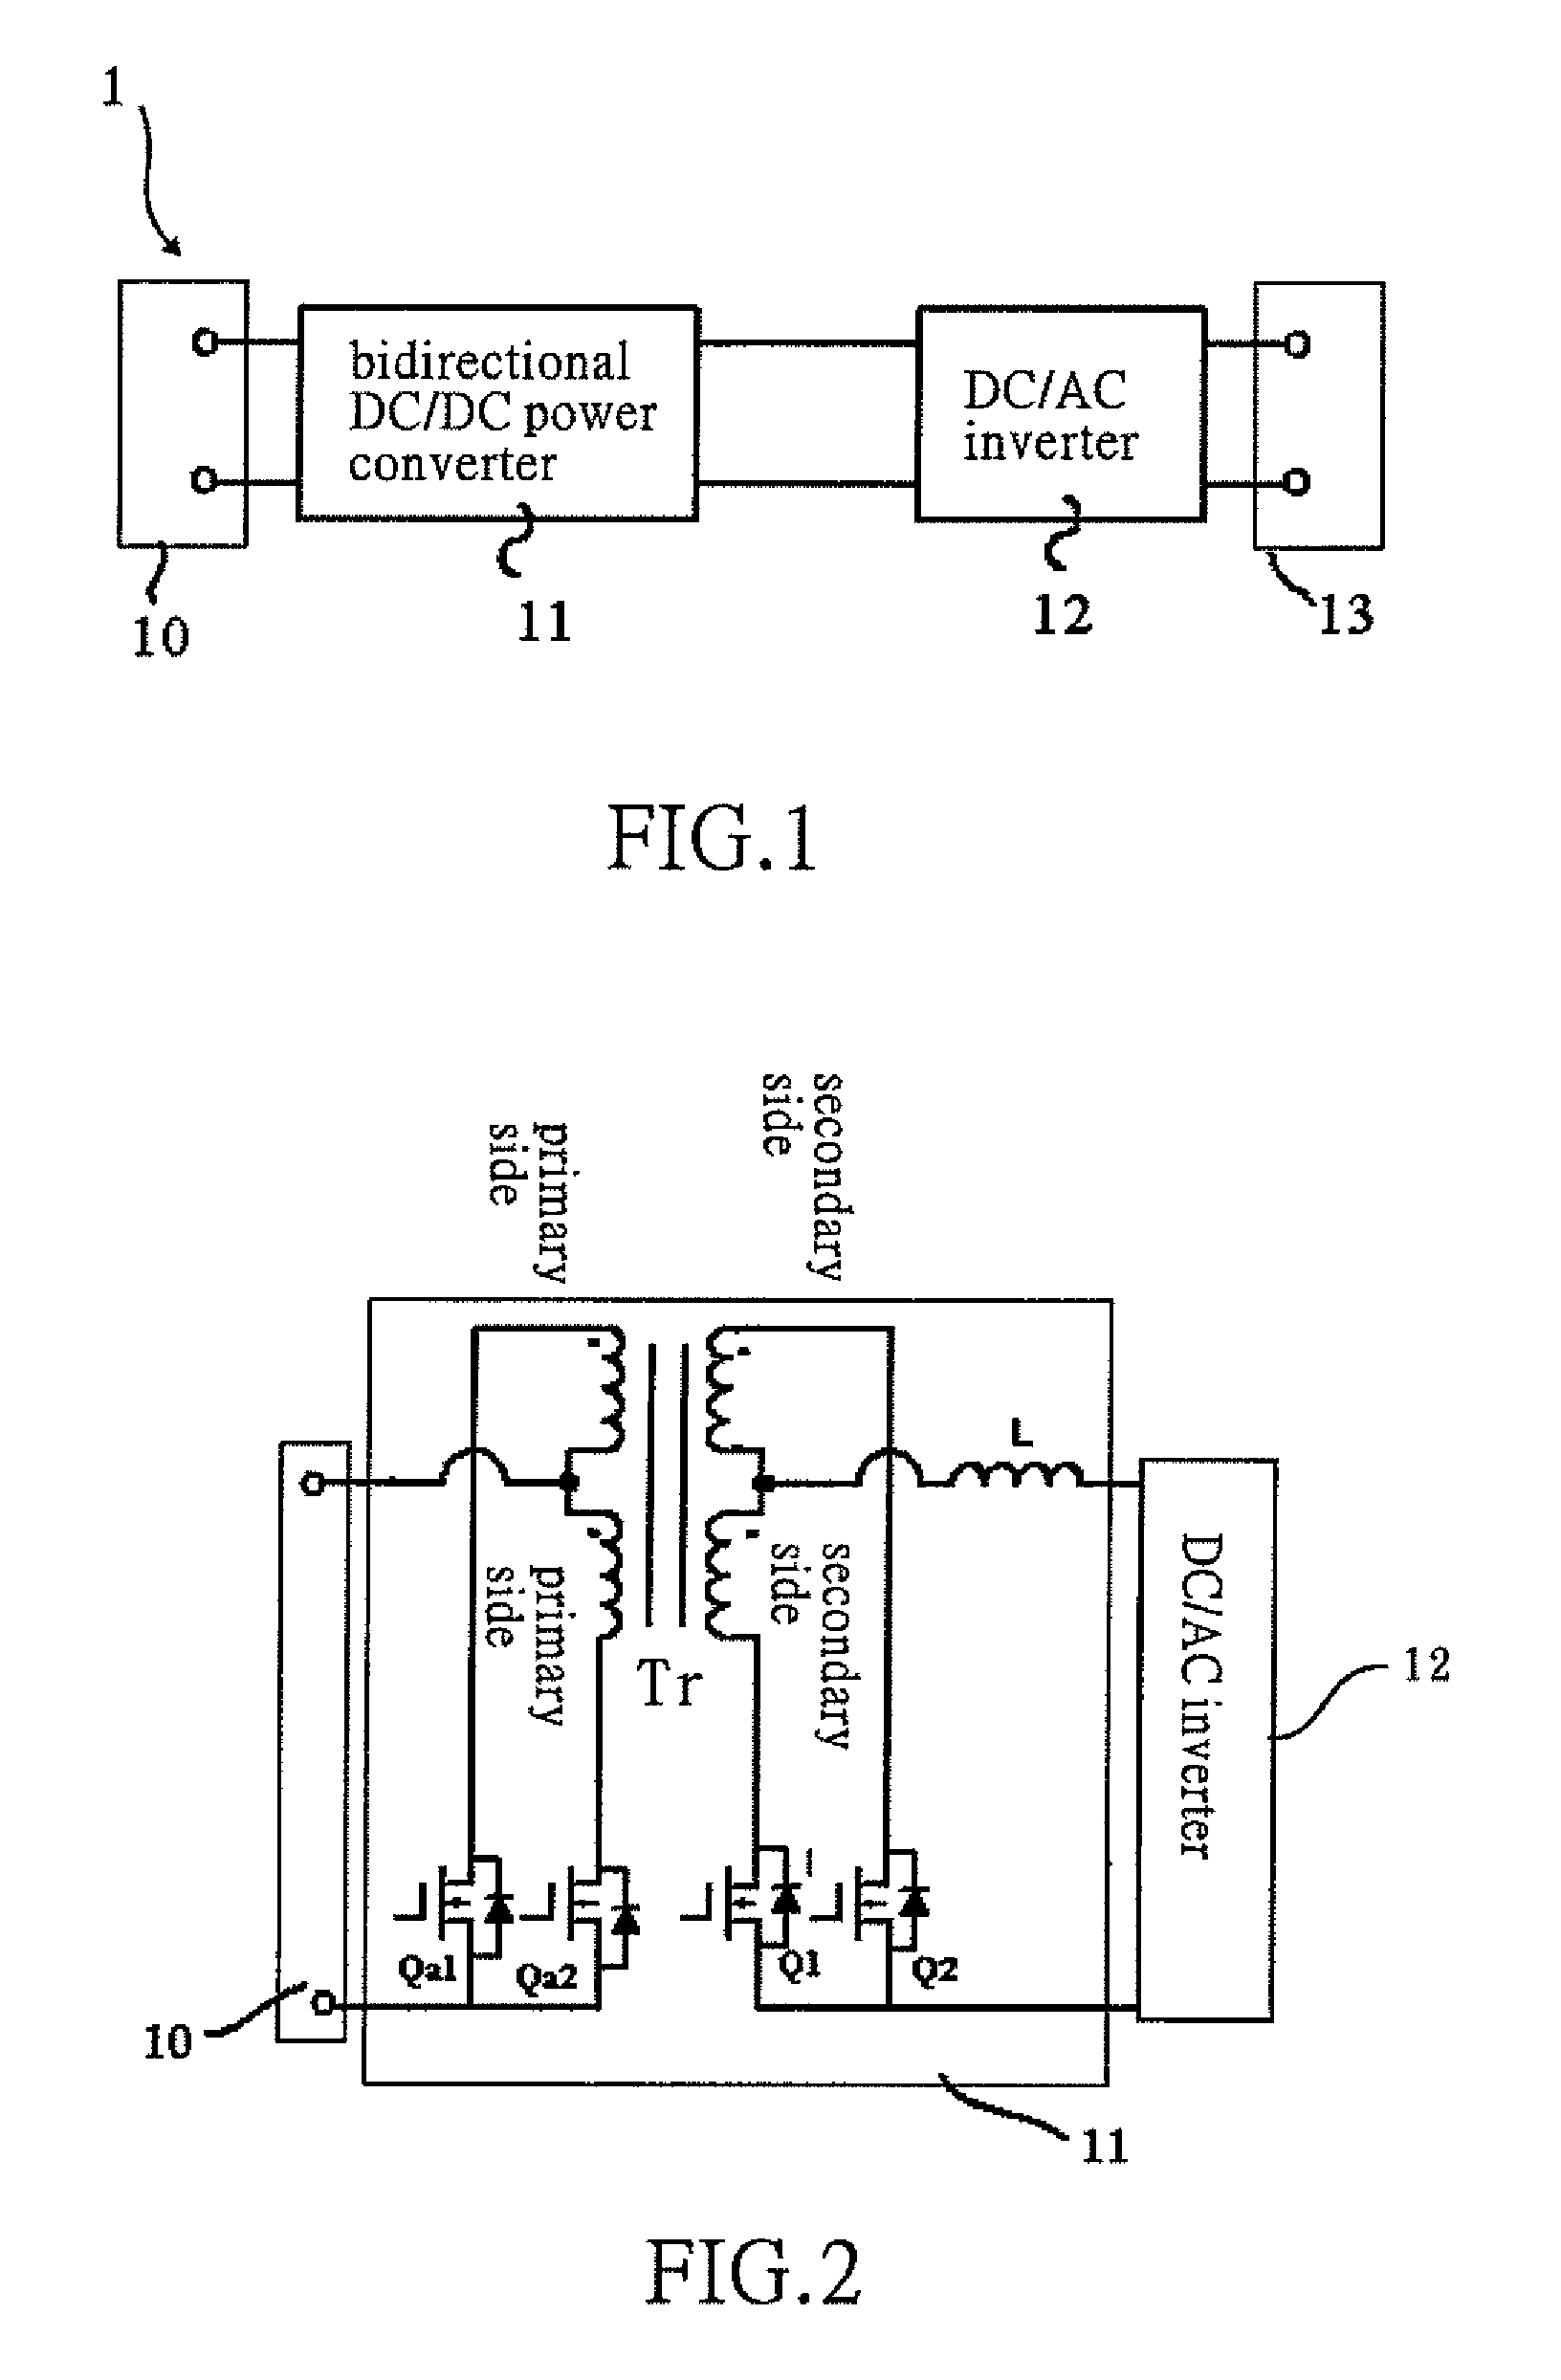 Bidirectional active power conditioner with DC/AC inverter in low-frequency switching